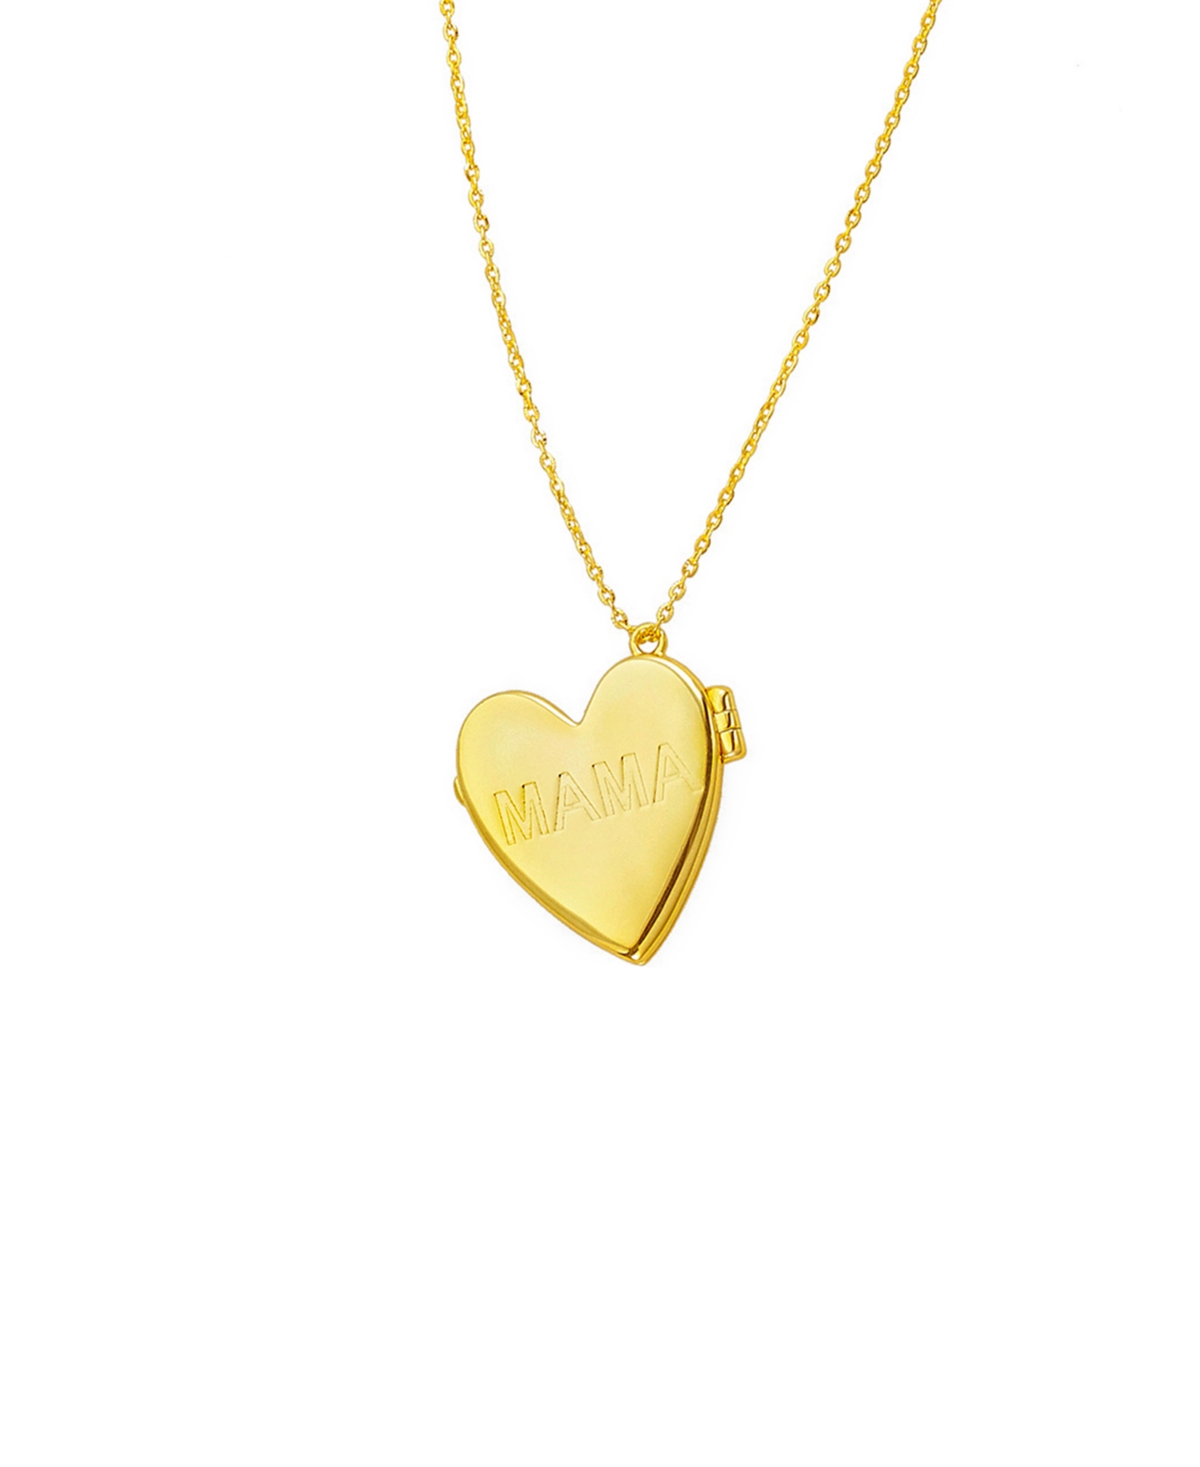 Adornia Heart Locket Necklace with Engraved Mama